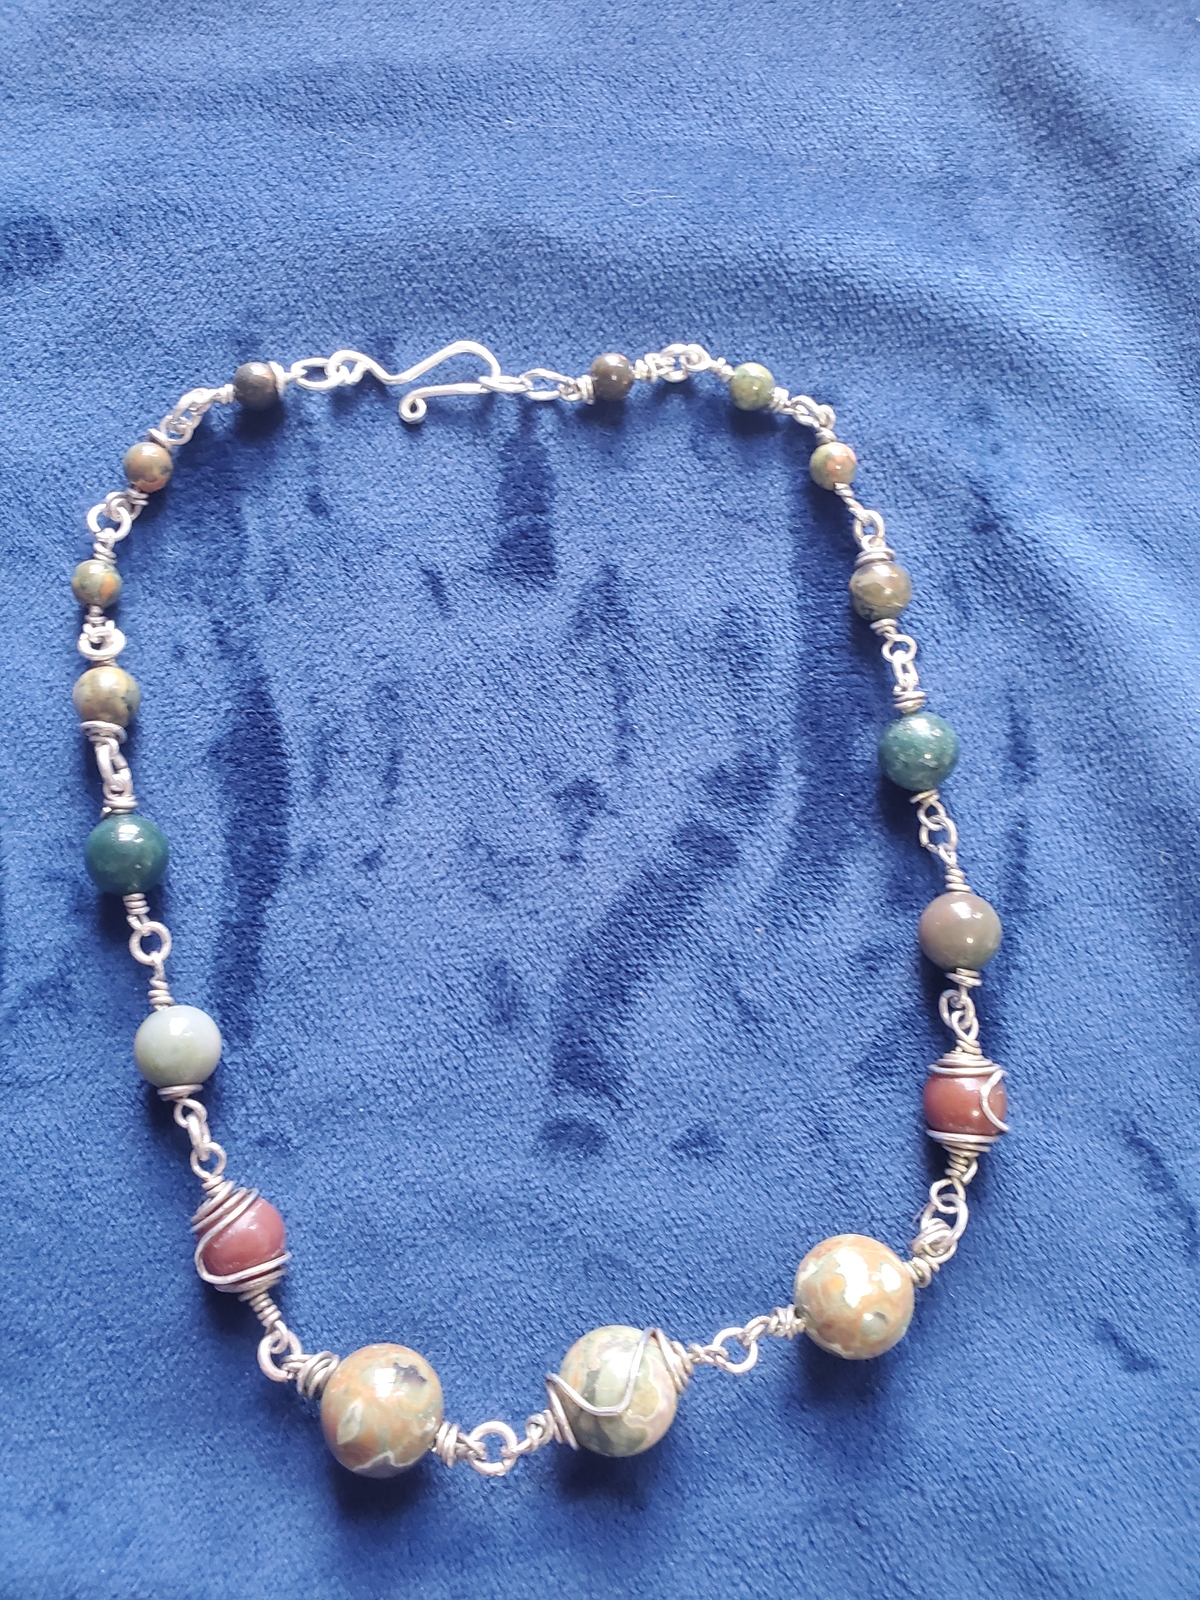 Primary image for Rhyolite Gemstone Sterling Silver Wire Wrapped Bead Choker Necklace 